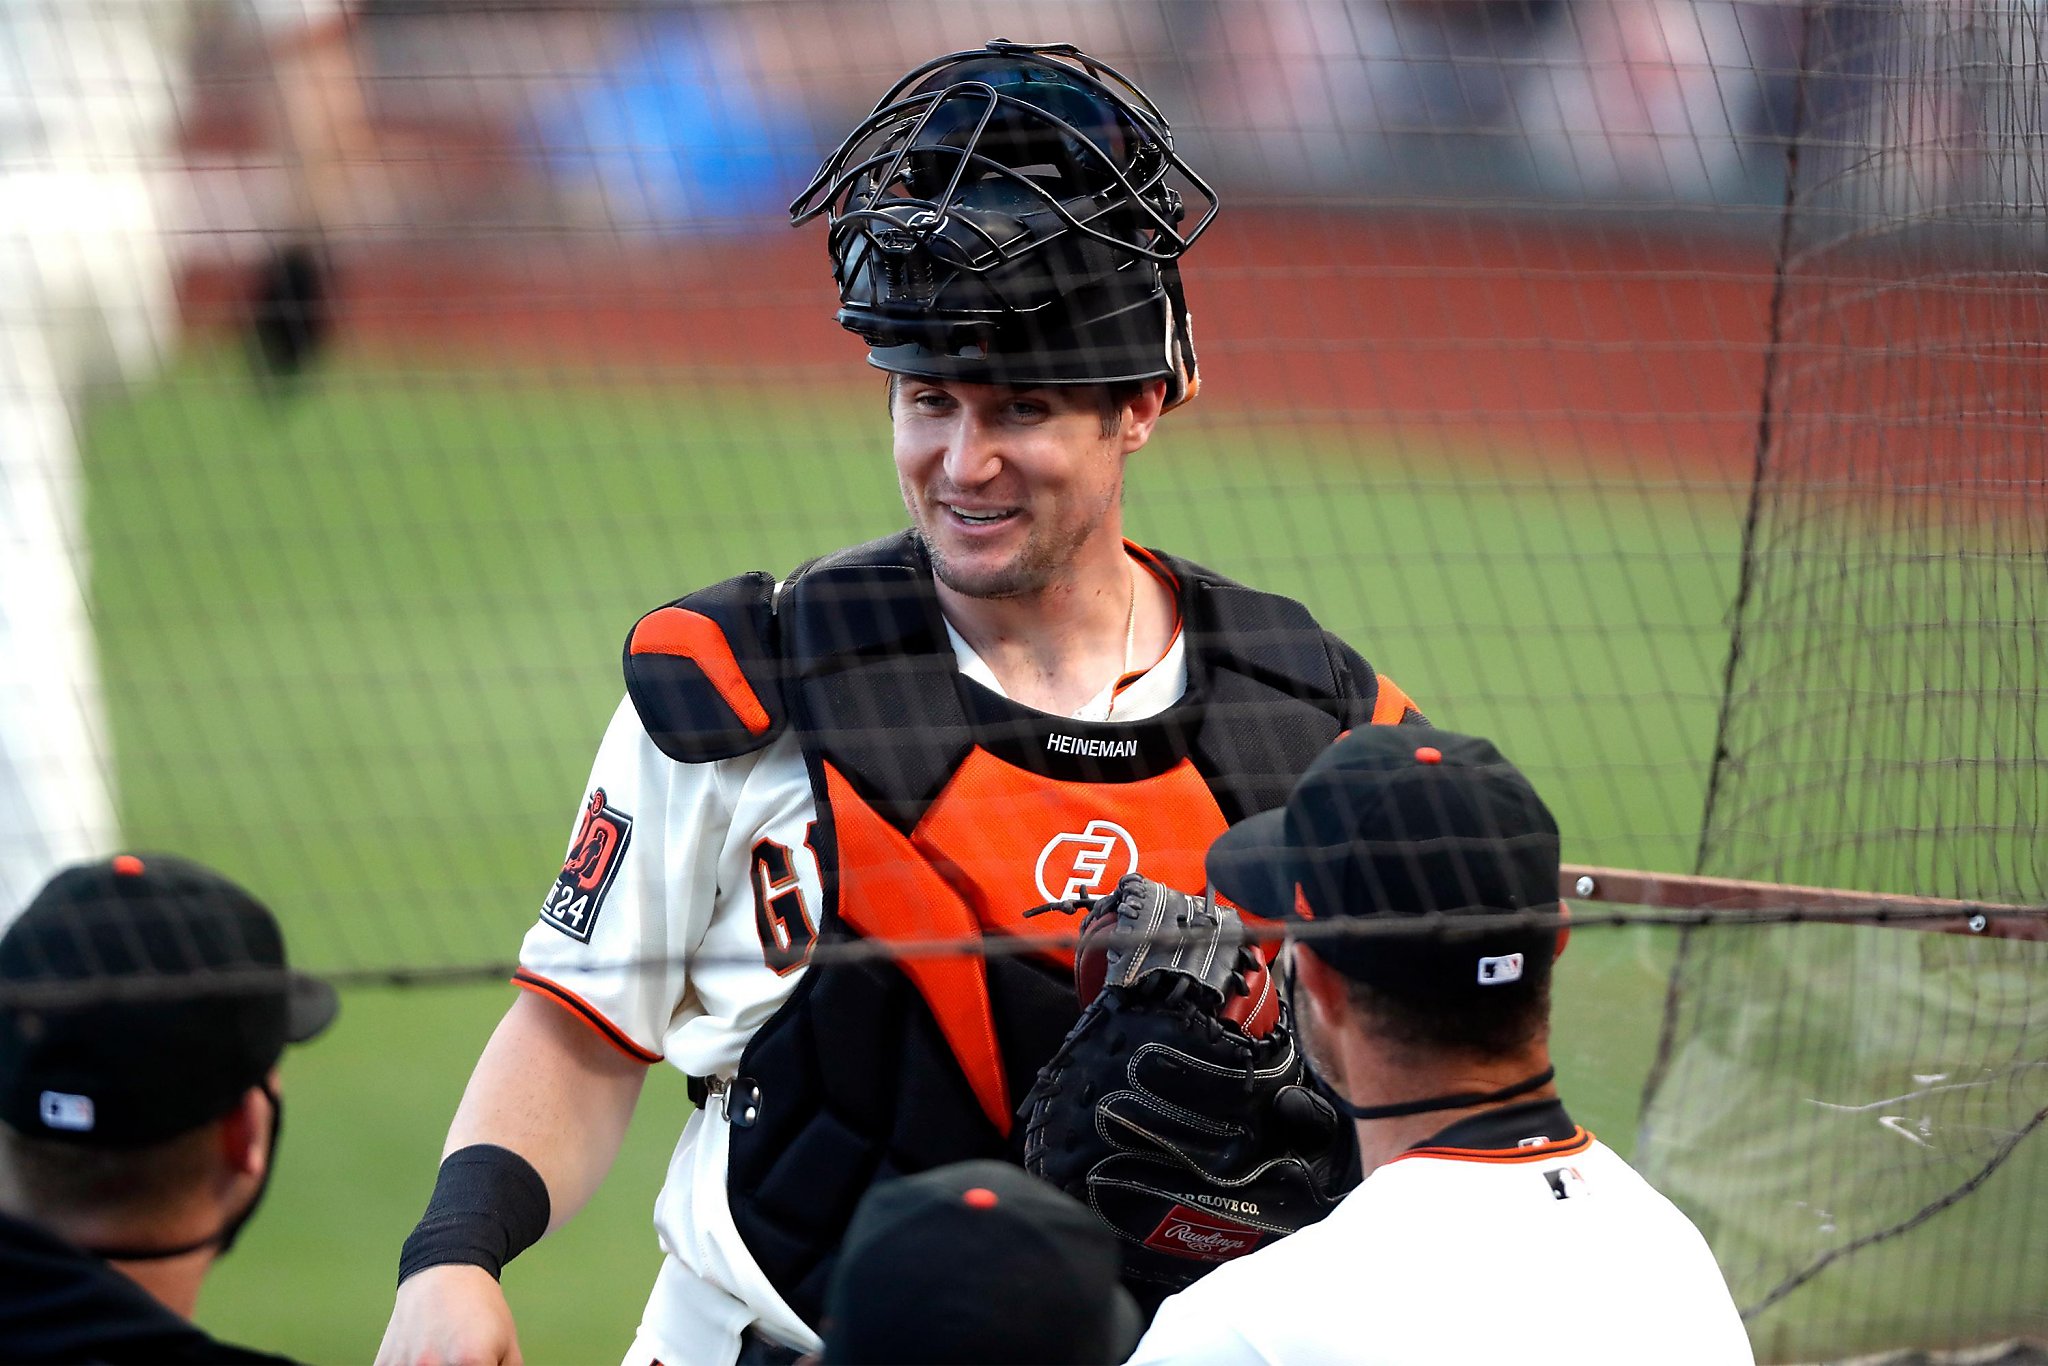 Star catcher Buster Posey likely out for year - The San Diego